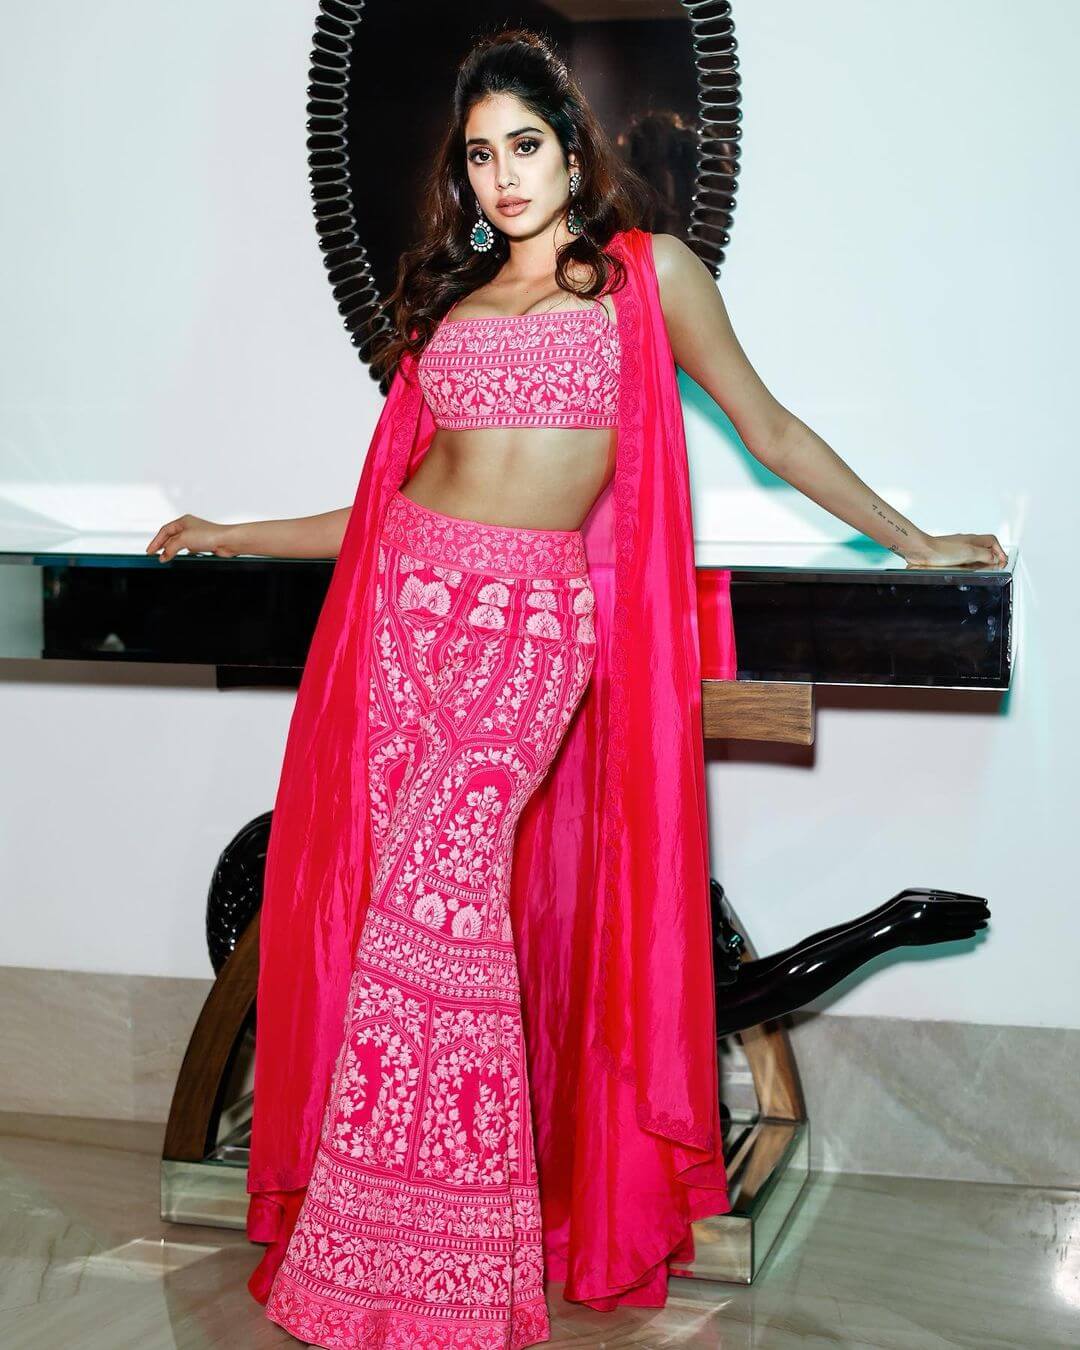 Jahanvi Kapoor Looks Glamorous in a Pink Co-ord Set